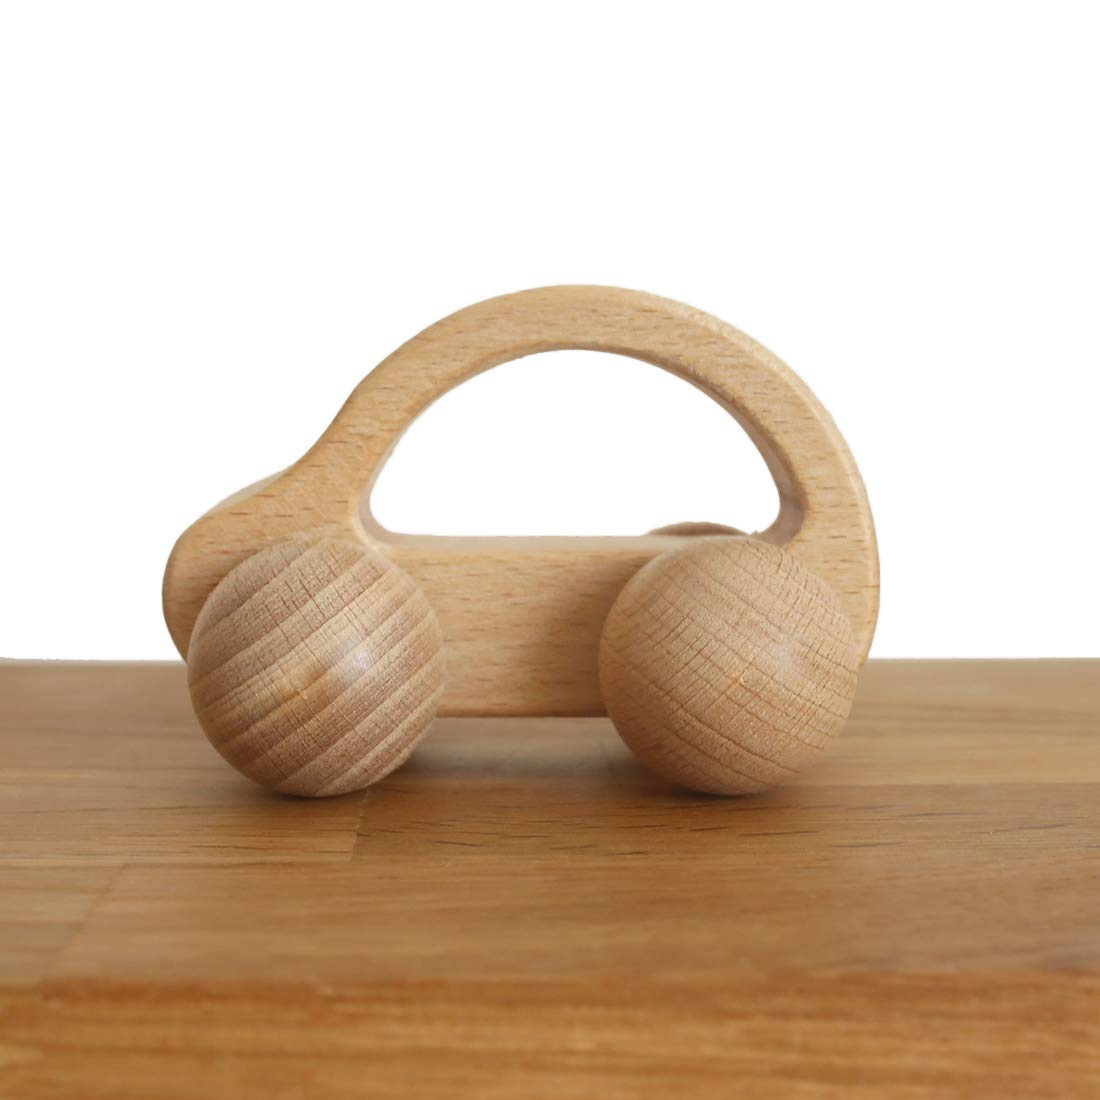 small wooden car toy